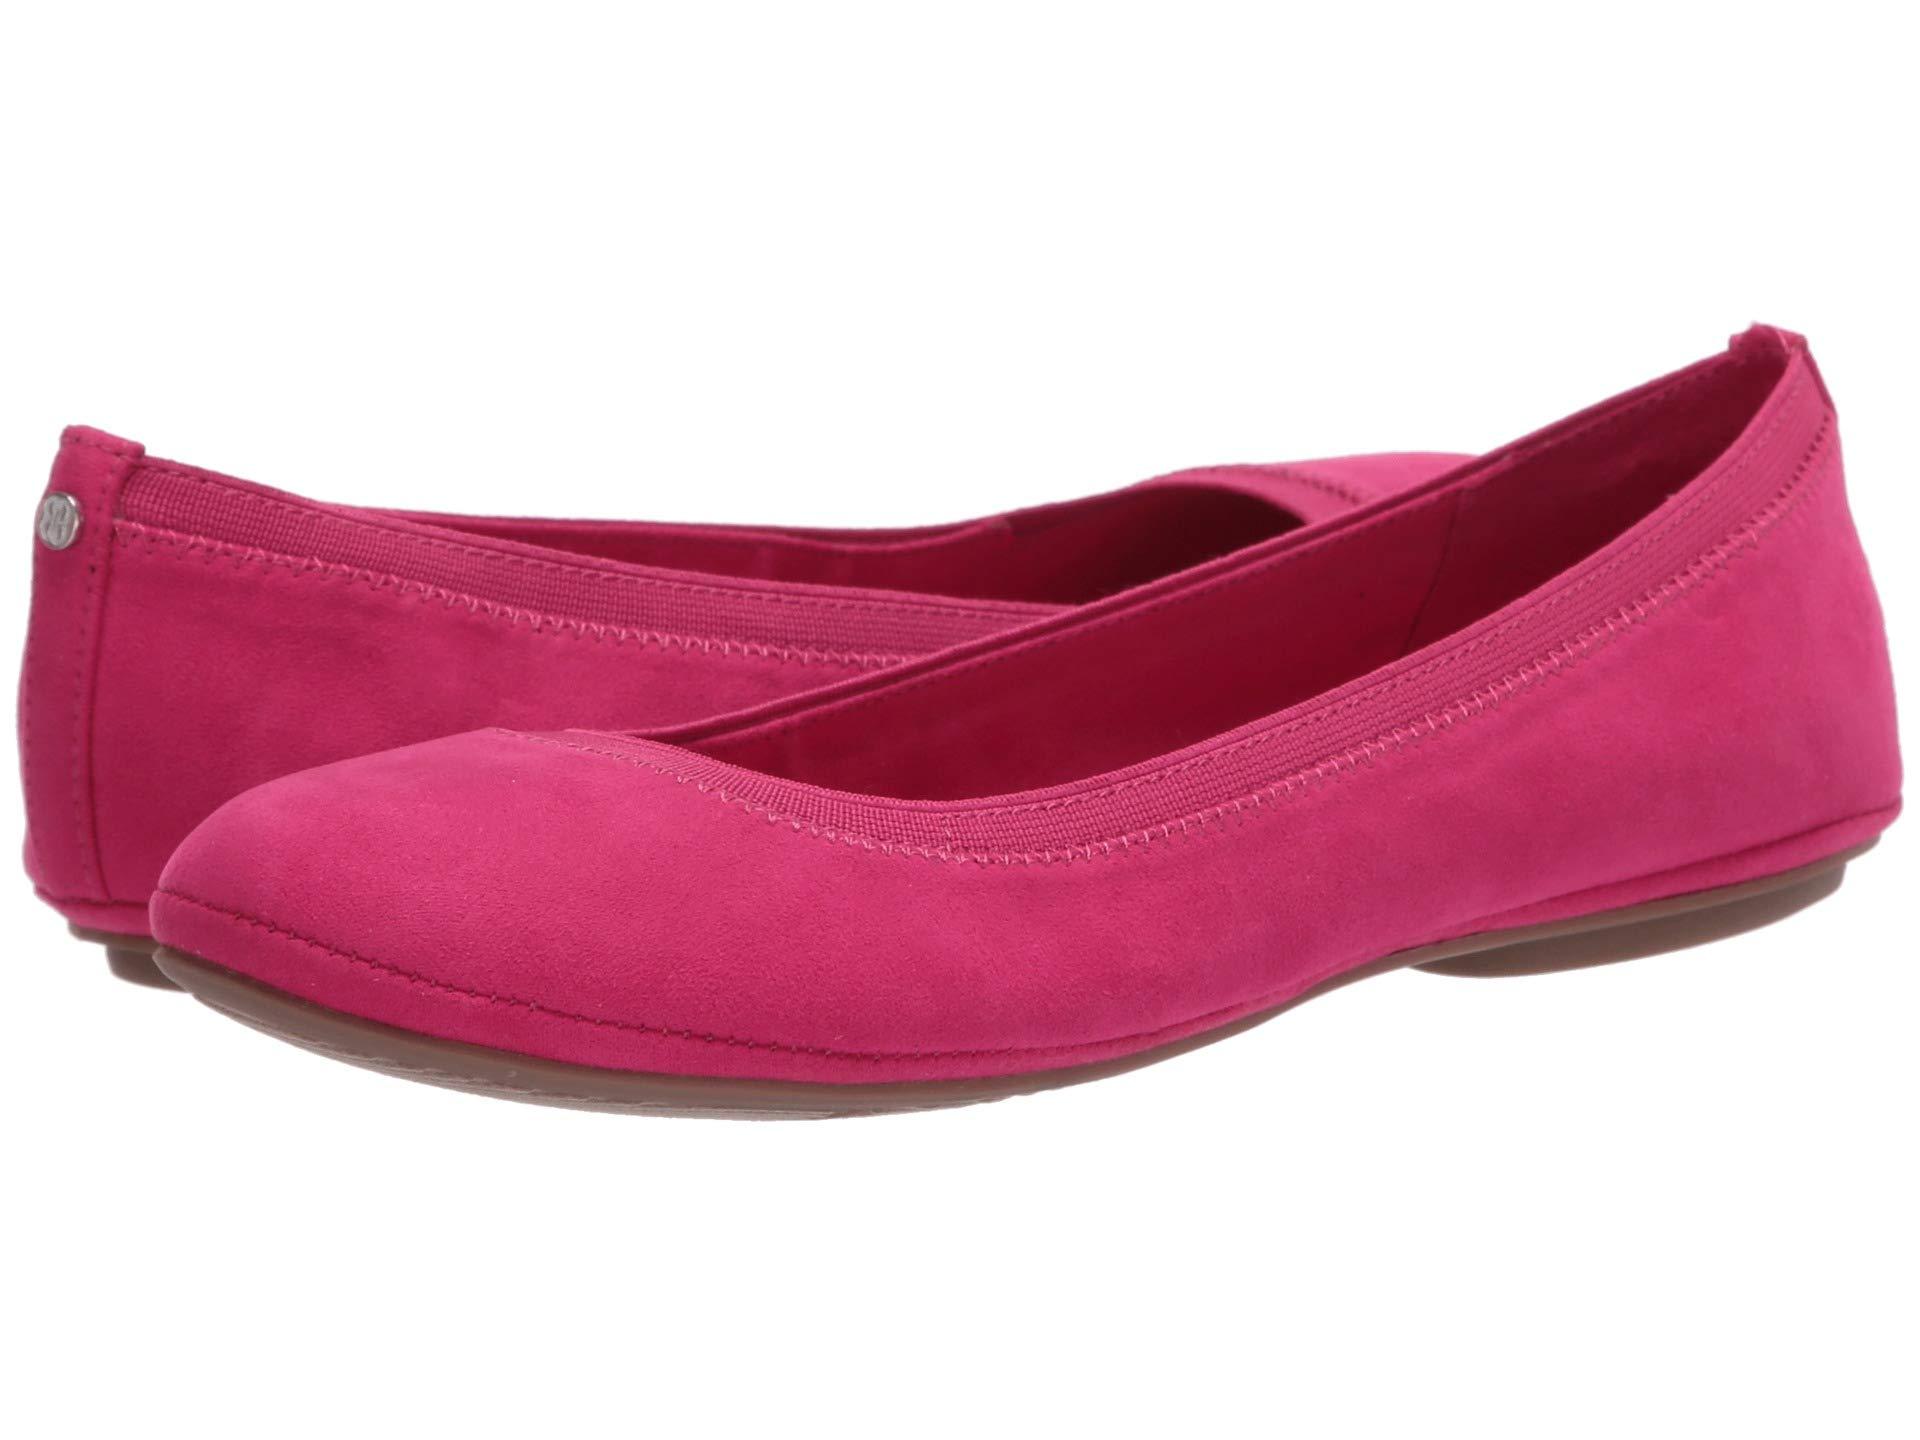 Bandolino Leather Edition (retro Rose) Flat Shoes in Pink - Save 57% - Lyst